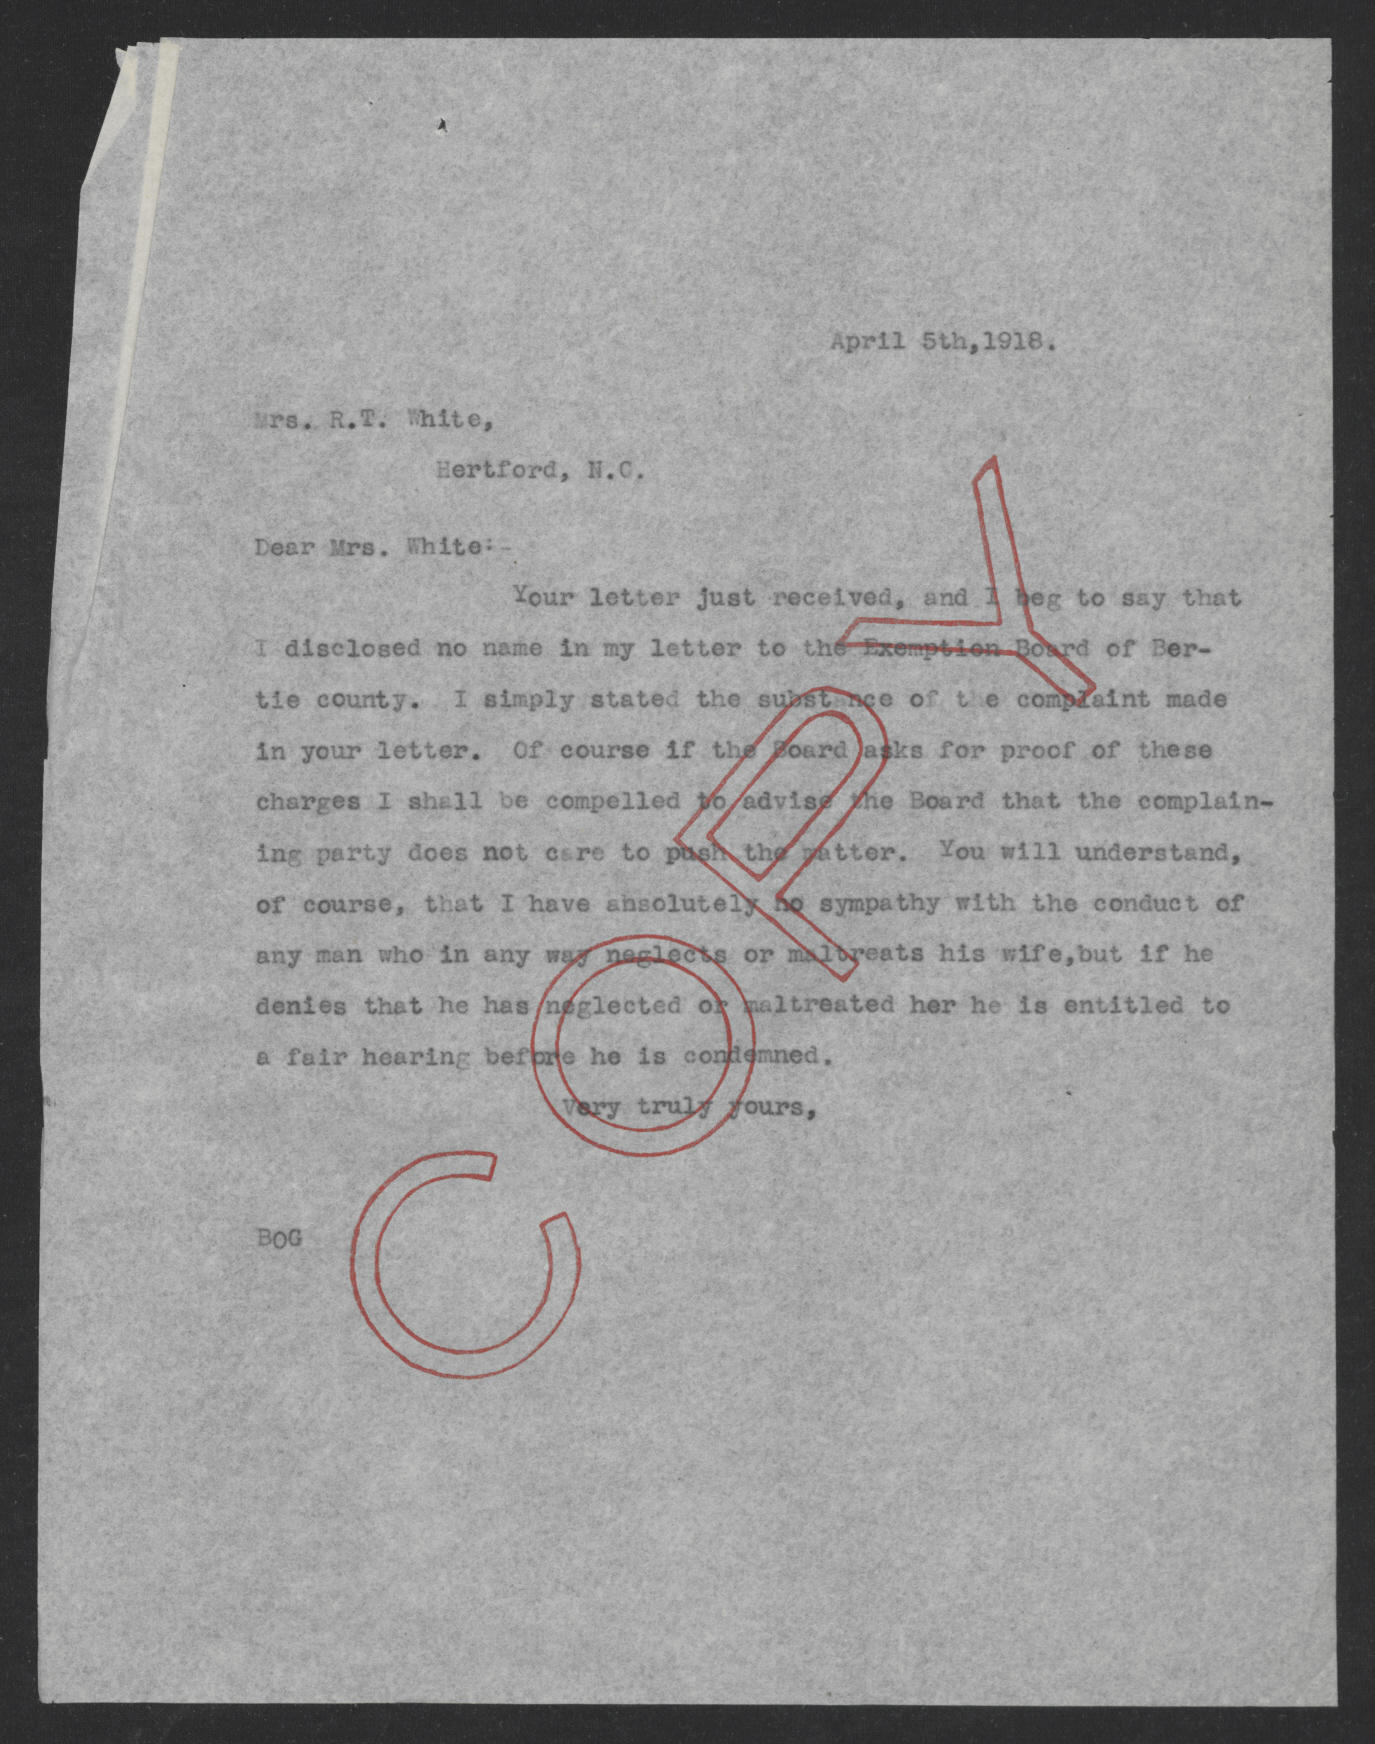 Letter from Thomas W. Bickett to Sarah R. L. White, April 5, 1918